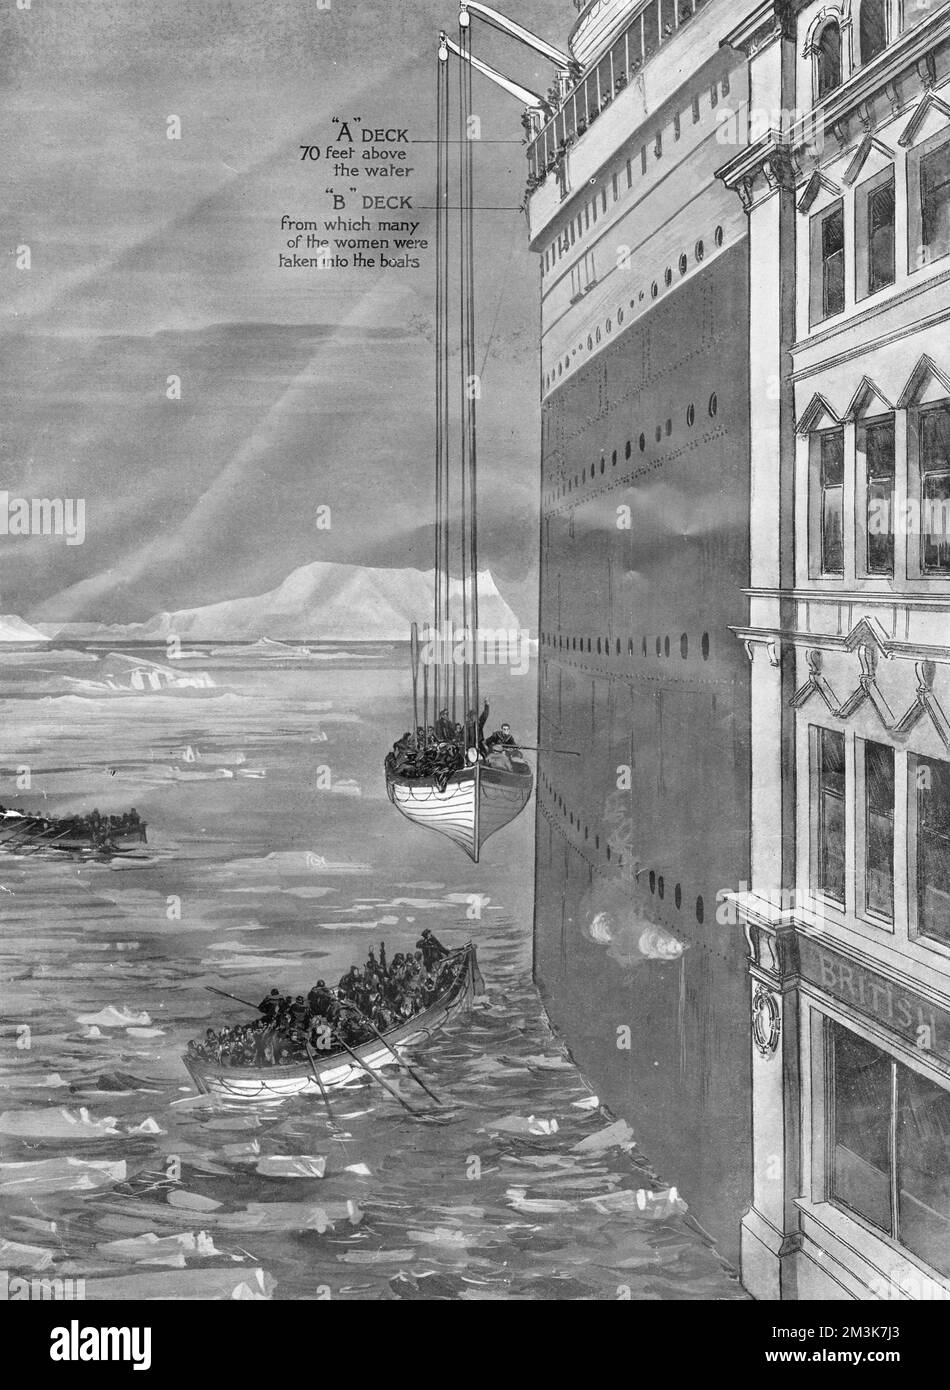 A diagram of a life boats from the Titanic being lowered to the water. The distance is compared to the height of a city office block. The 70 ft distance to the sea from the deck made lowering the boats hazardous.     Date: 1912 Stock Photo